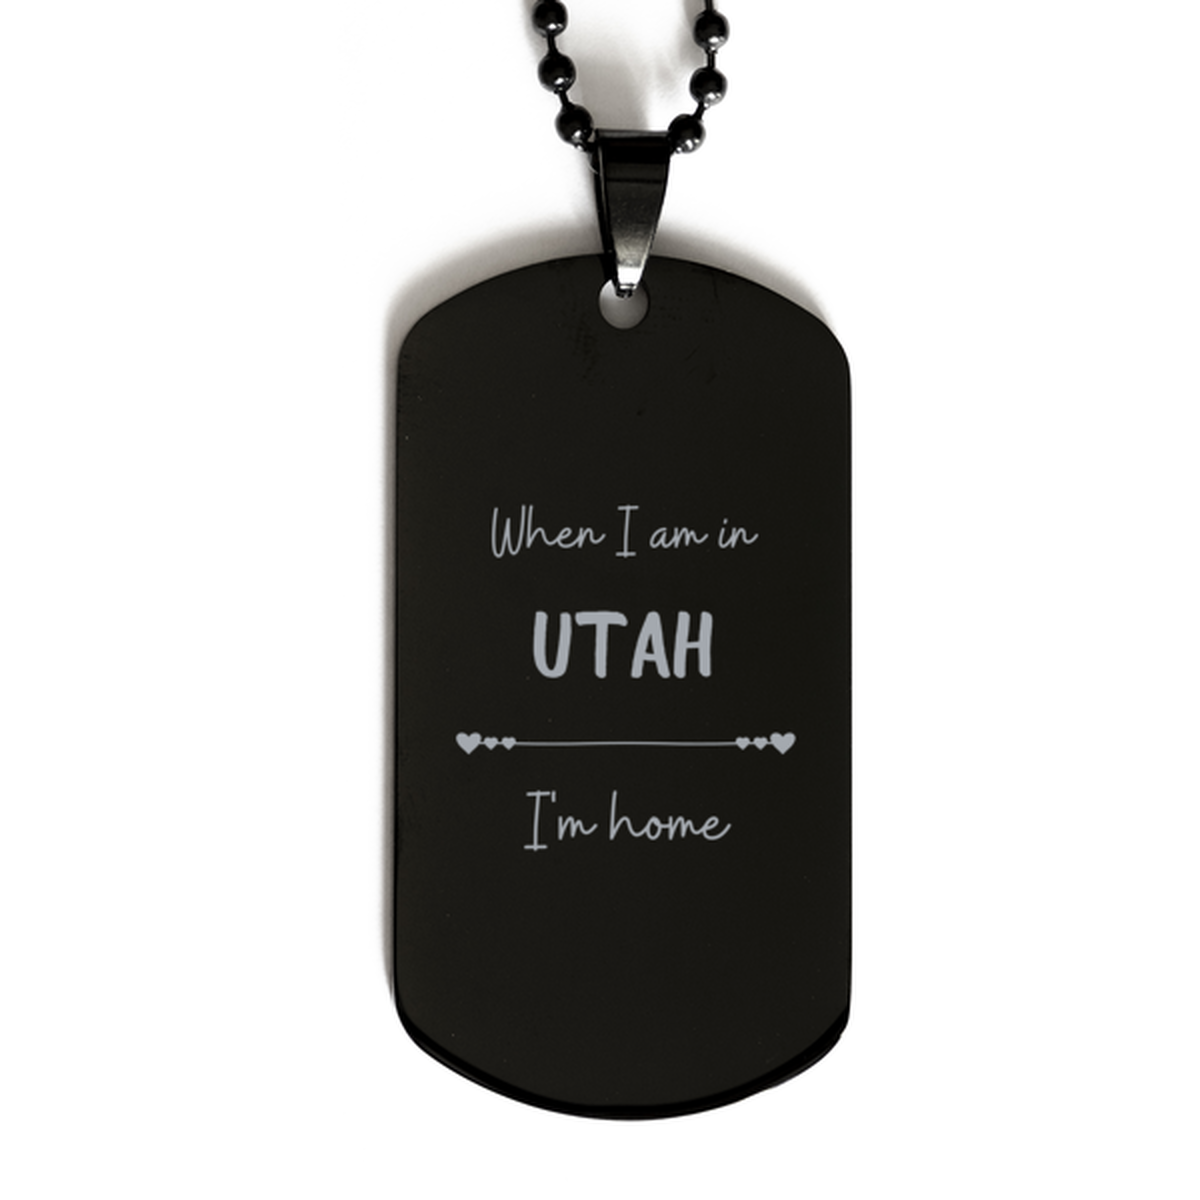 When I am in Utah I'm home Black Dog Tag, Cheap Gifts For Utah, State Utah Birthday Gifts for Friends Coworker